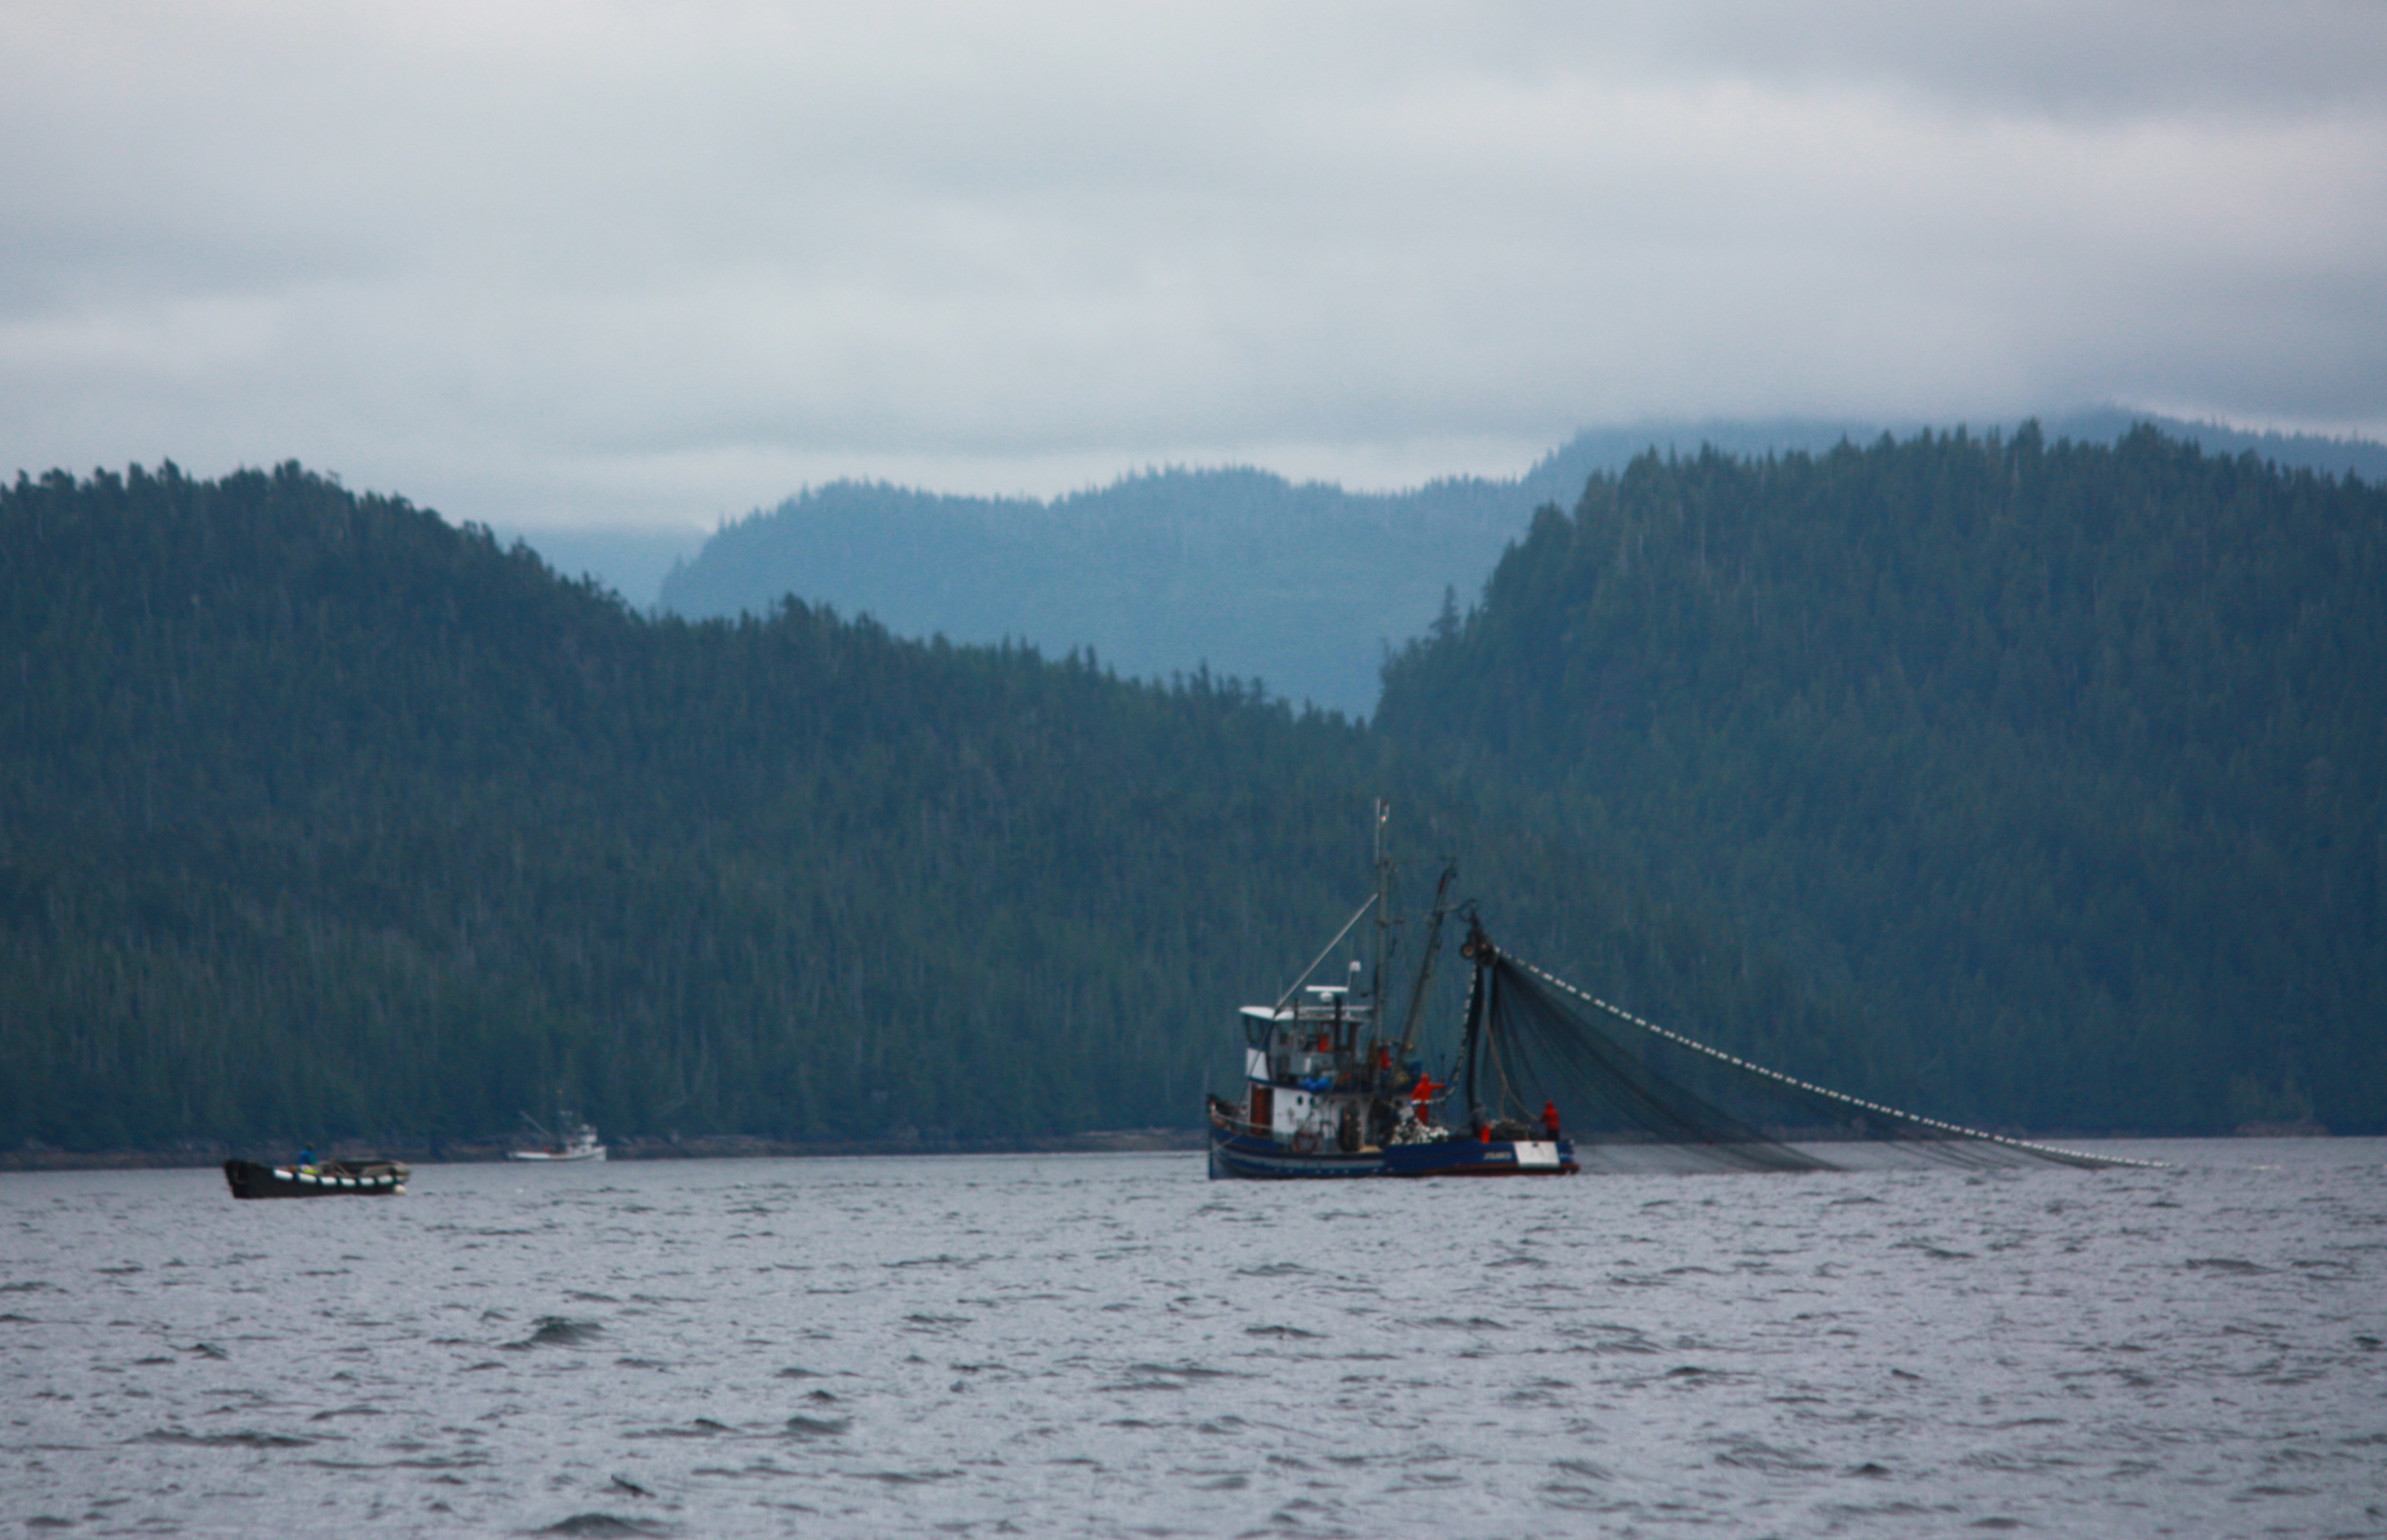  Whales were not the only wildlife at Orcas Cove, with the record pink salmon runs, we got to watch the Purse Seiners fishing at the point in August. 